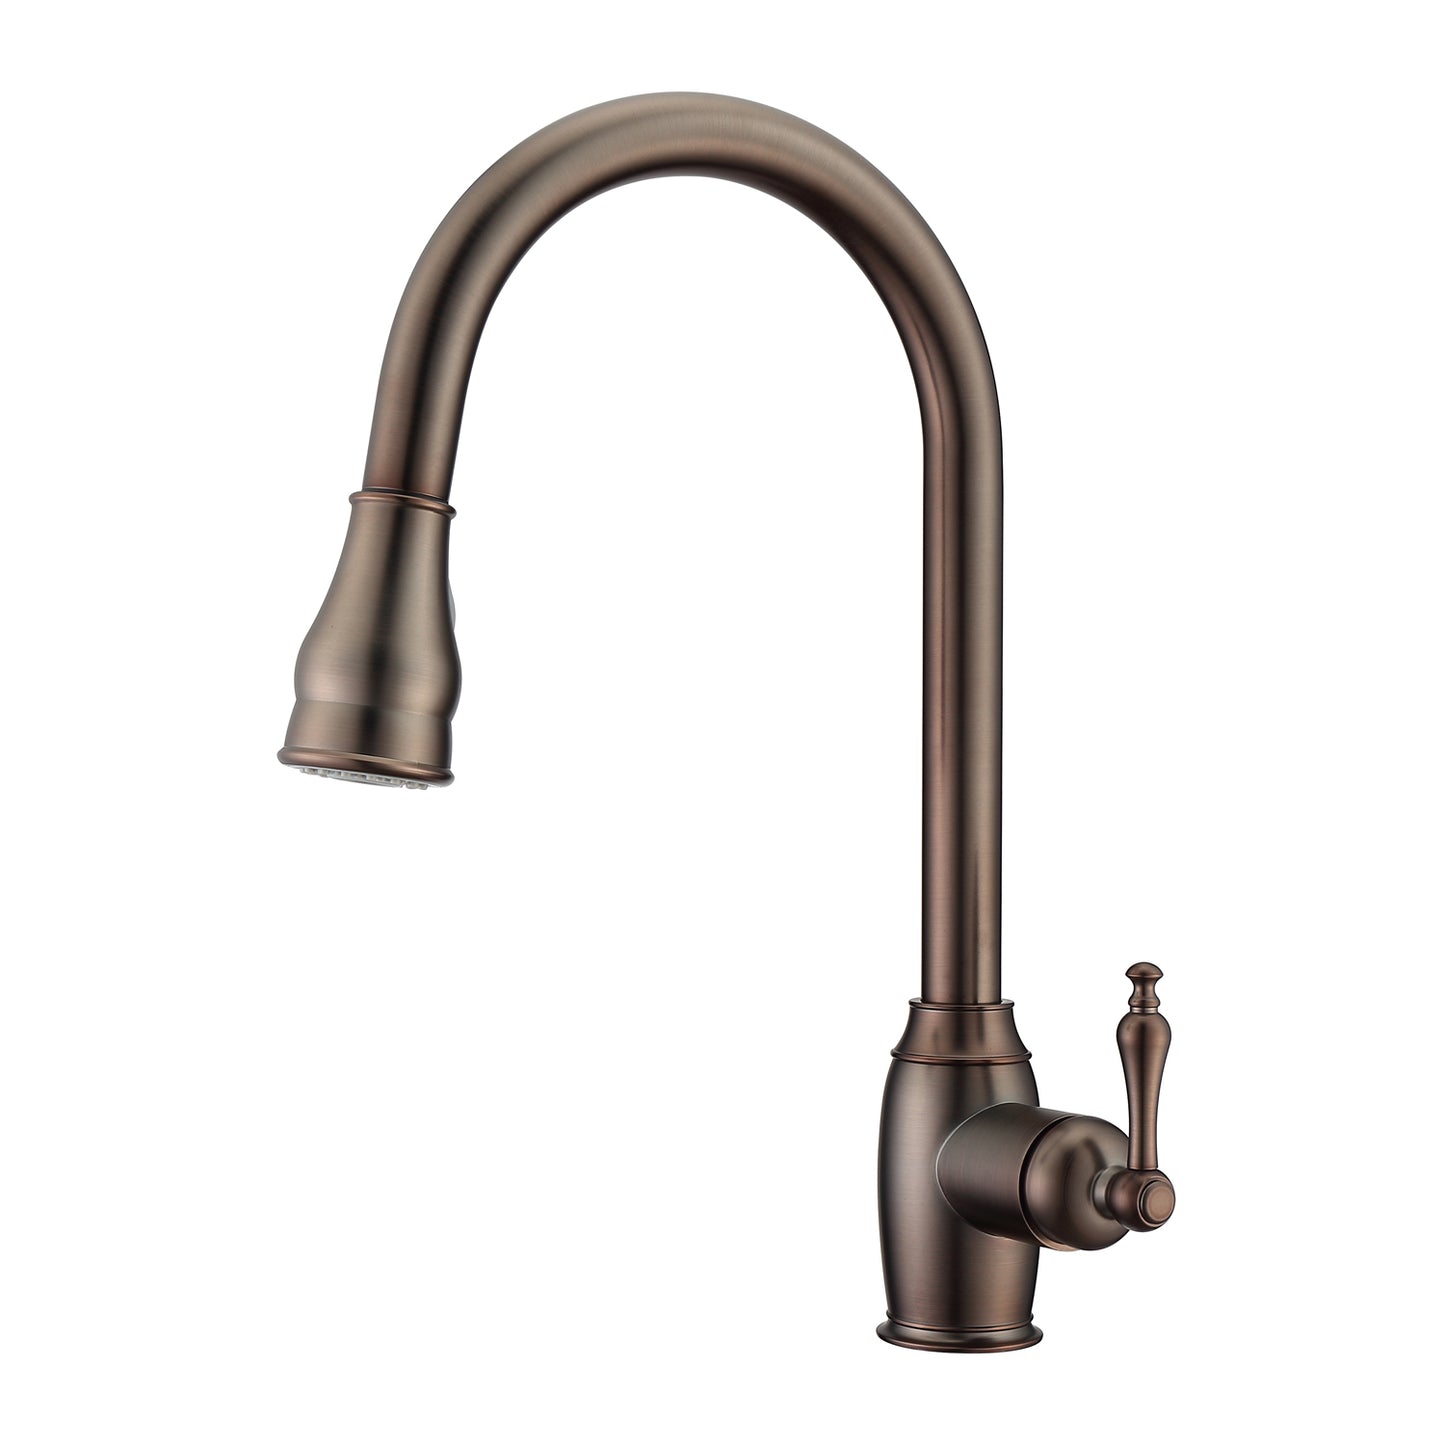 Bay 1 Kitchen Faucet, Pull-Out Sprayer, Single Lever Handle, Oil Rubbed Bronze